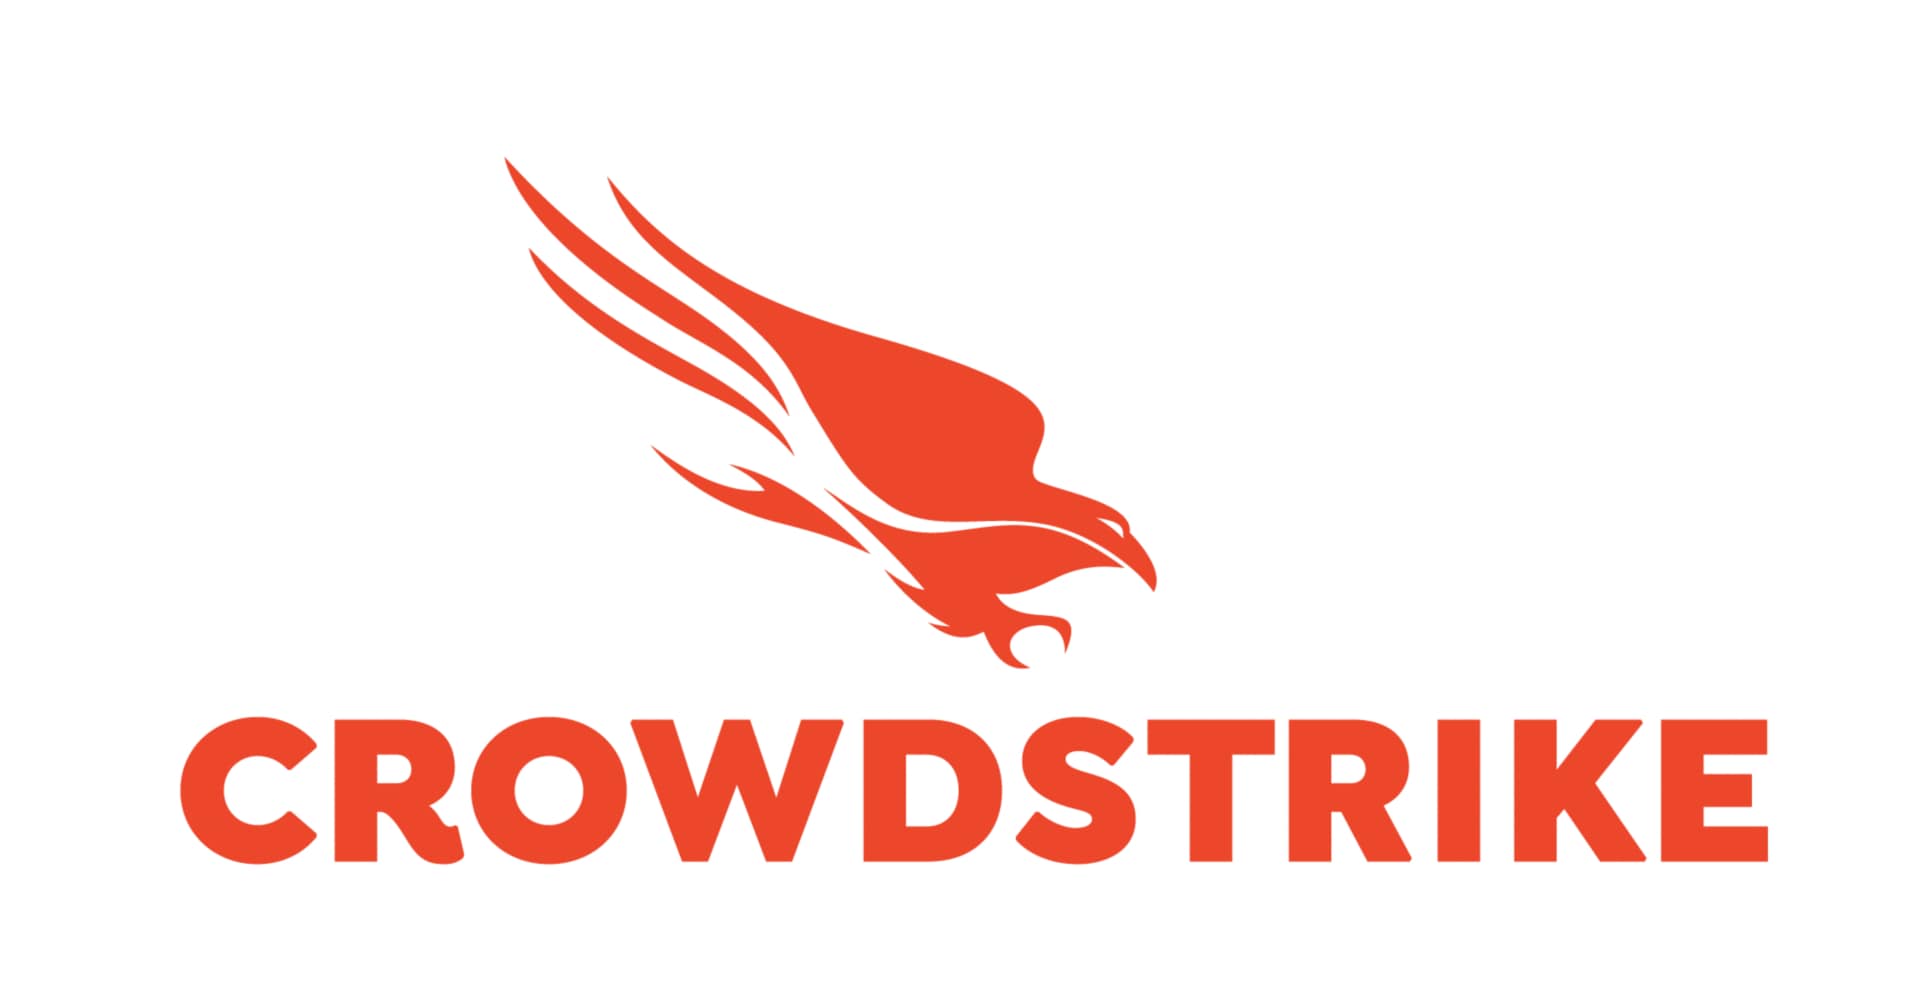 CrowdStrike 36-Month Falcon Overwatch Service (2,000-2,499 Licenses)